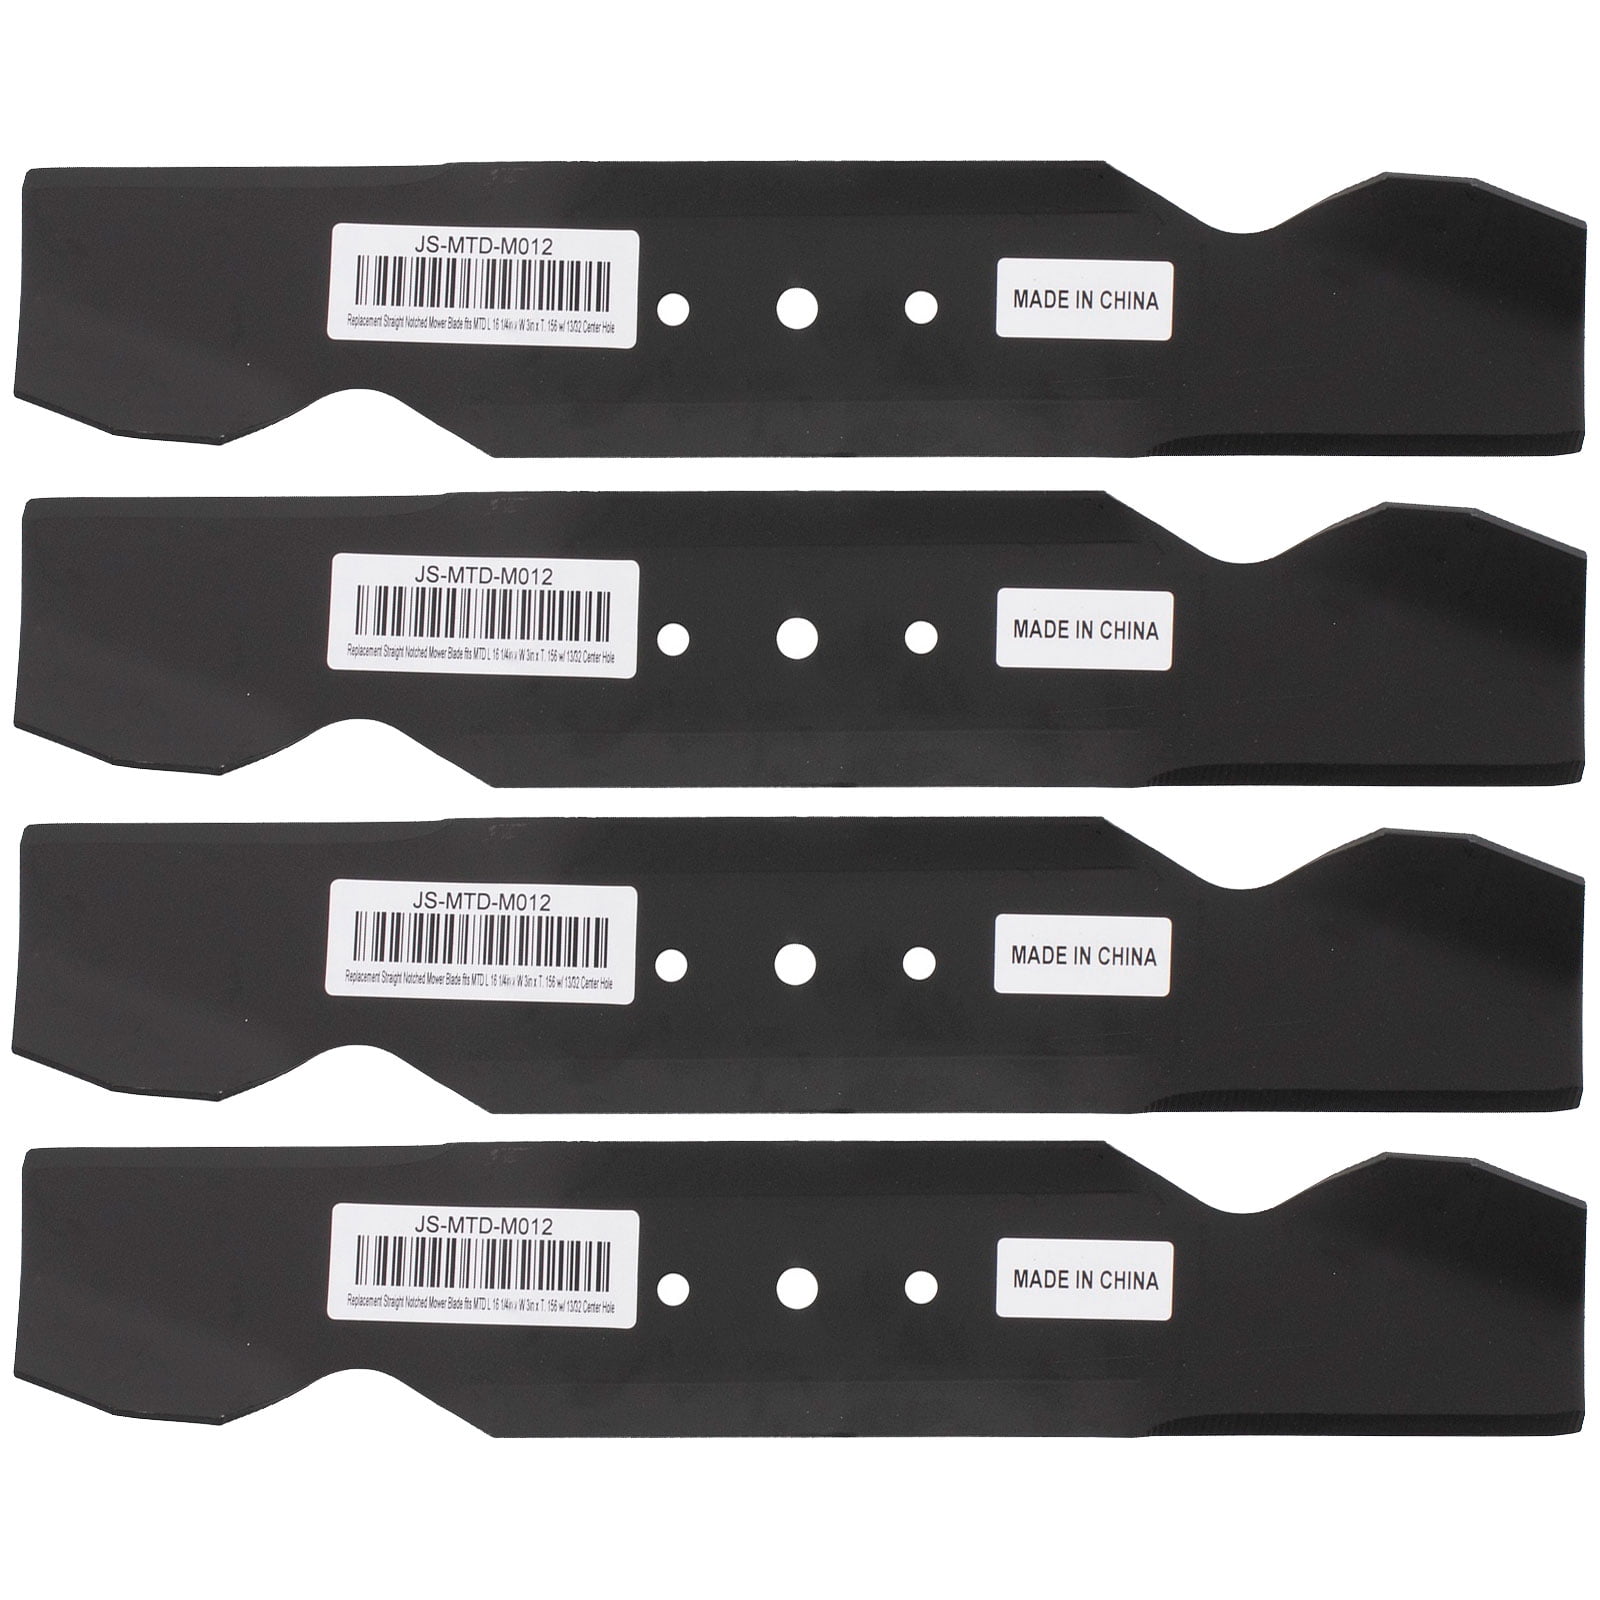 320-040 Notched Air-lift Lawnmower Replacement Blade for Grasshopper for sale online 3 Pack 